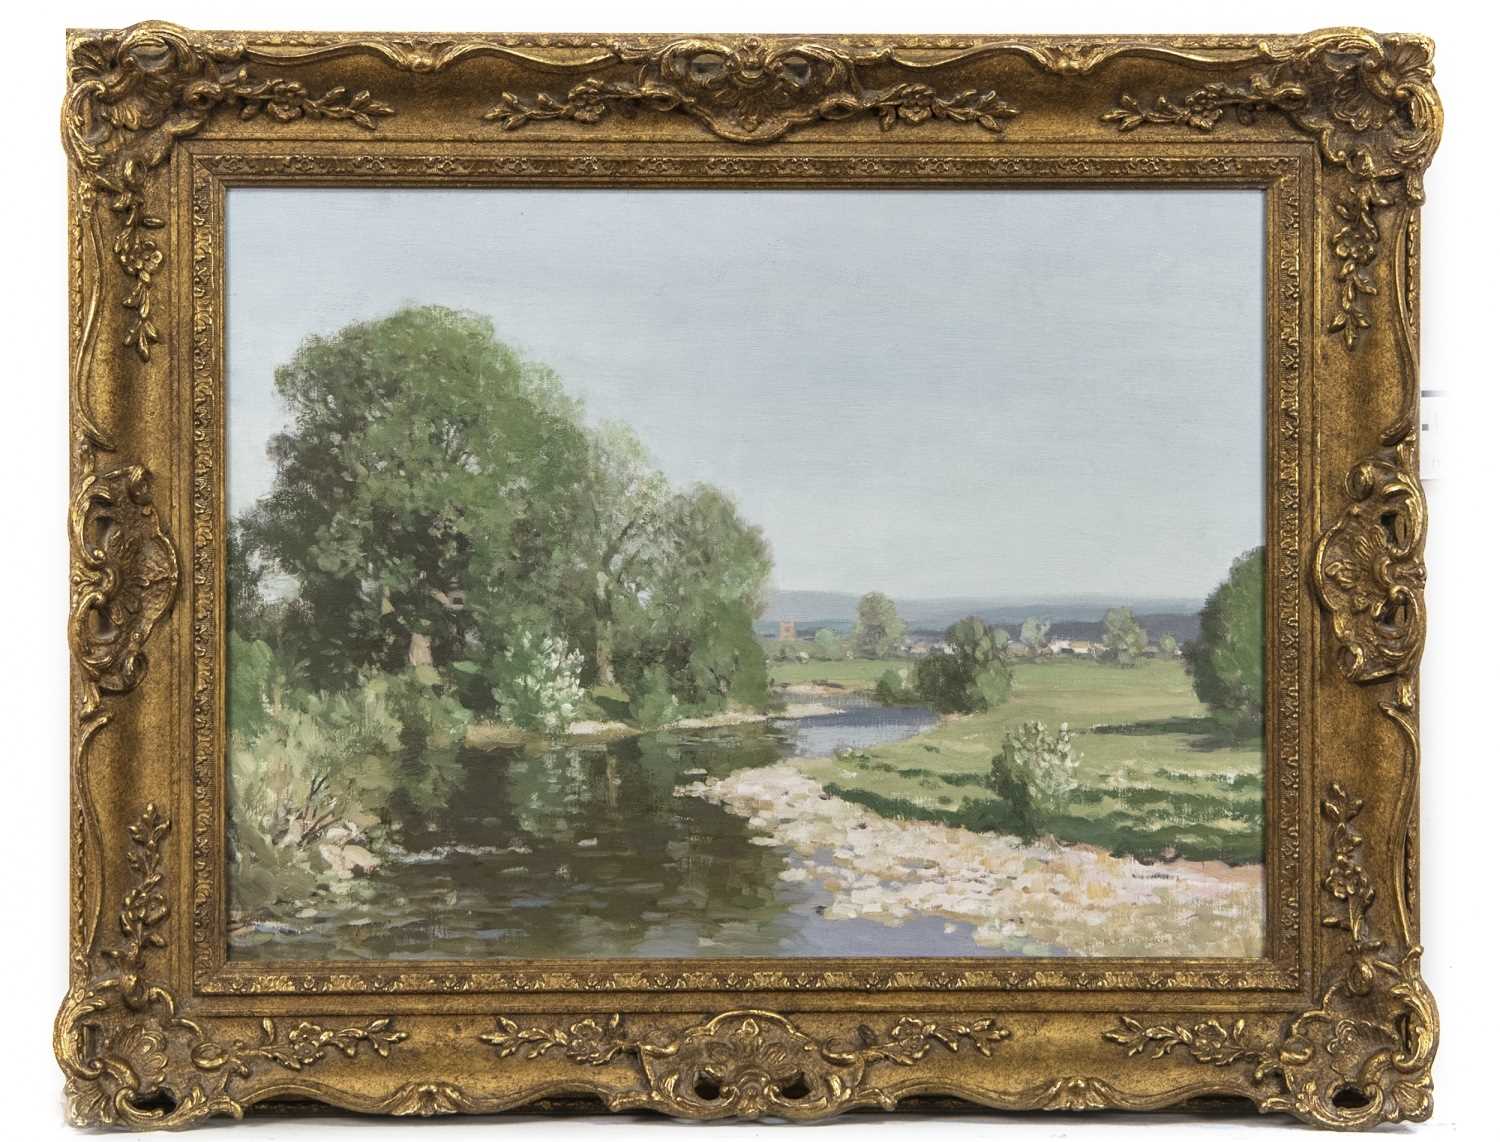 Lot 201 - AFTON WATER, AN OIL BY GEORGE HOUSTON